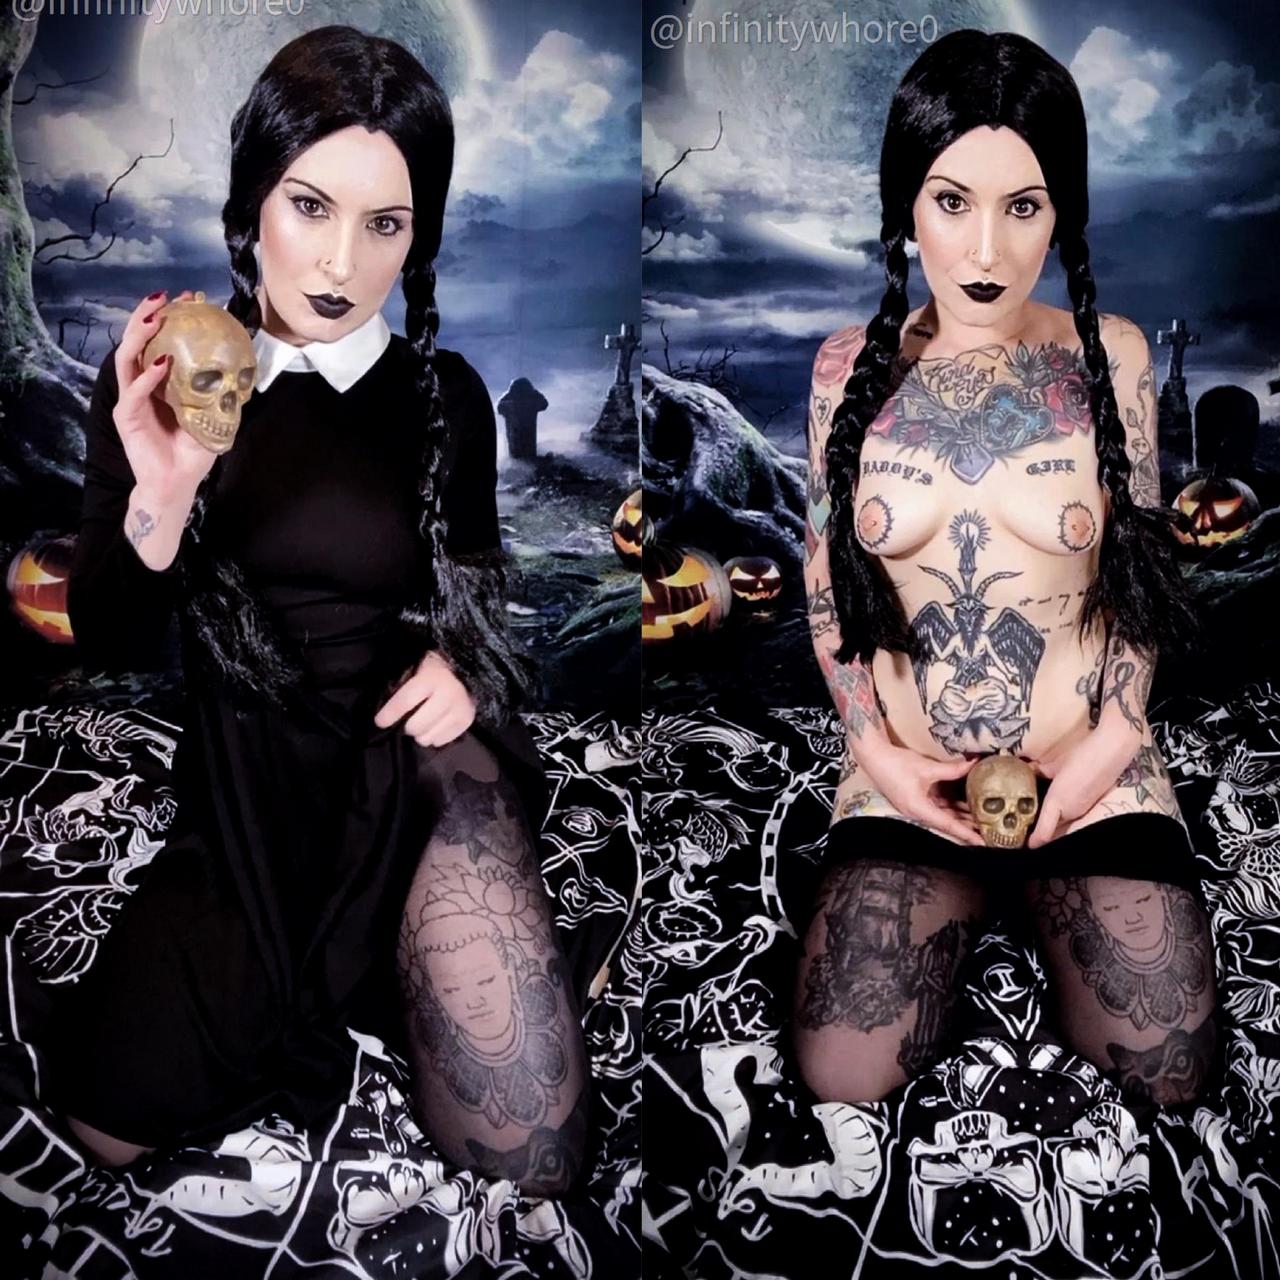 Wednesday Addams On Off By Infinitywh0r